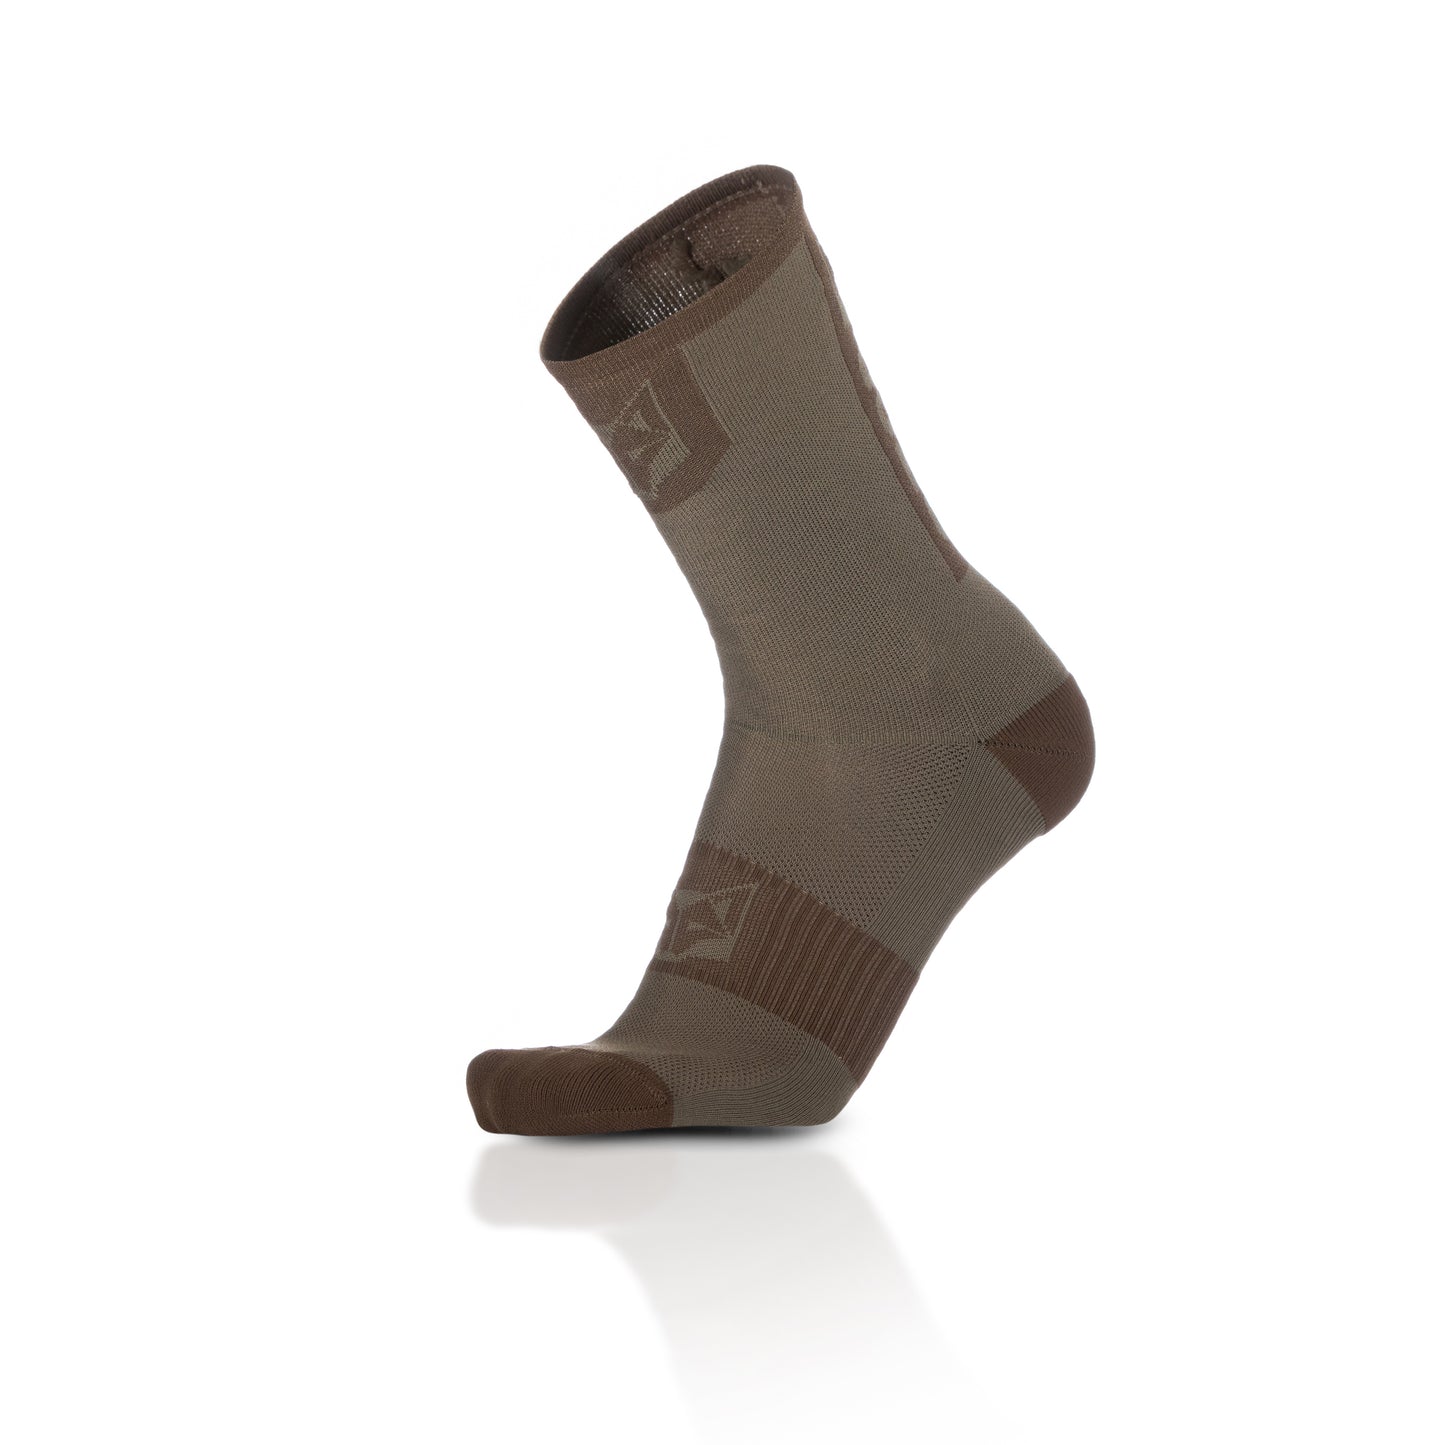 Calcetines de Ciclismo High Cut - Gold & Coffee (Outlet)